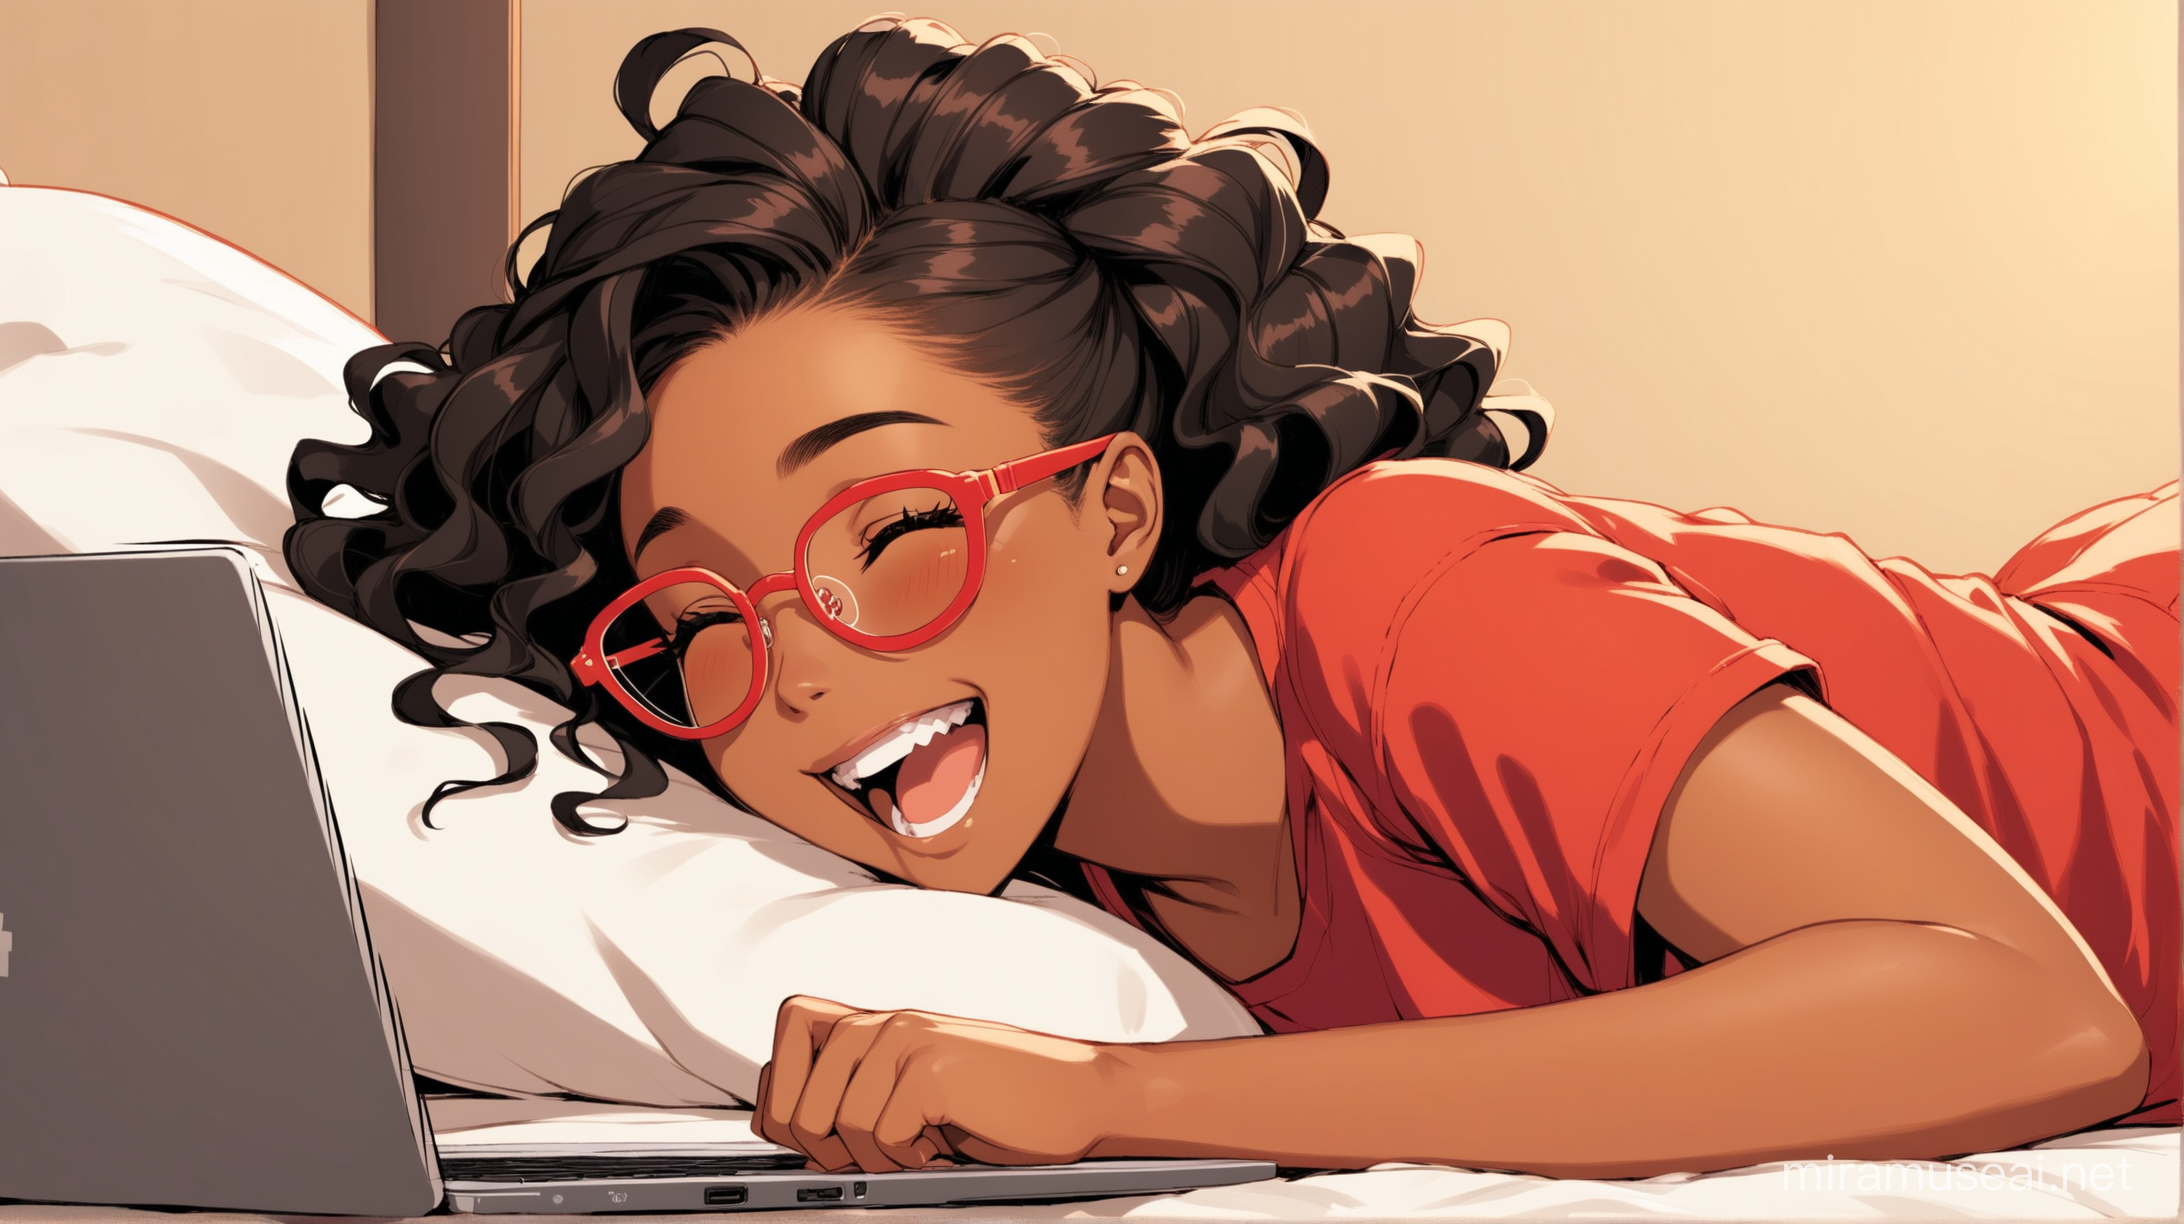 Joyful Black Woman Watching Anime on Laptop with Red Glasses